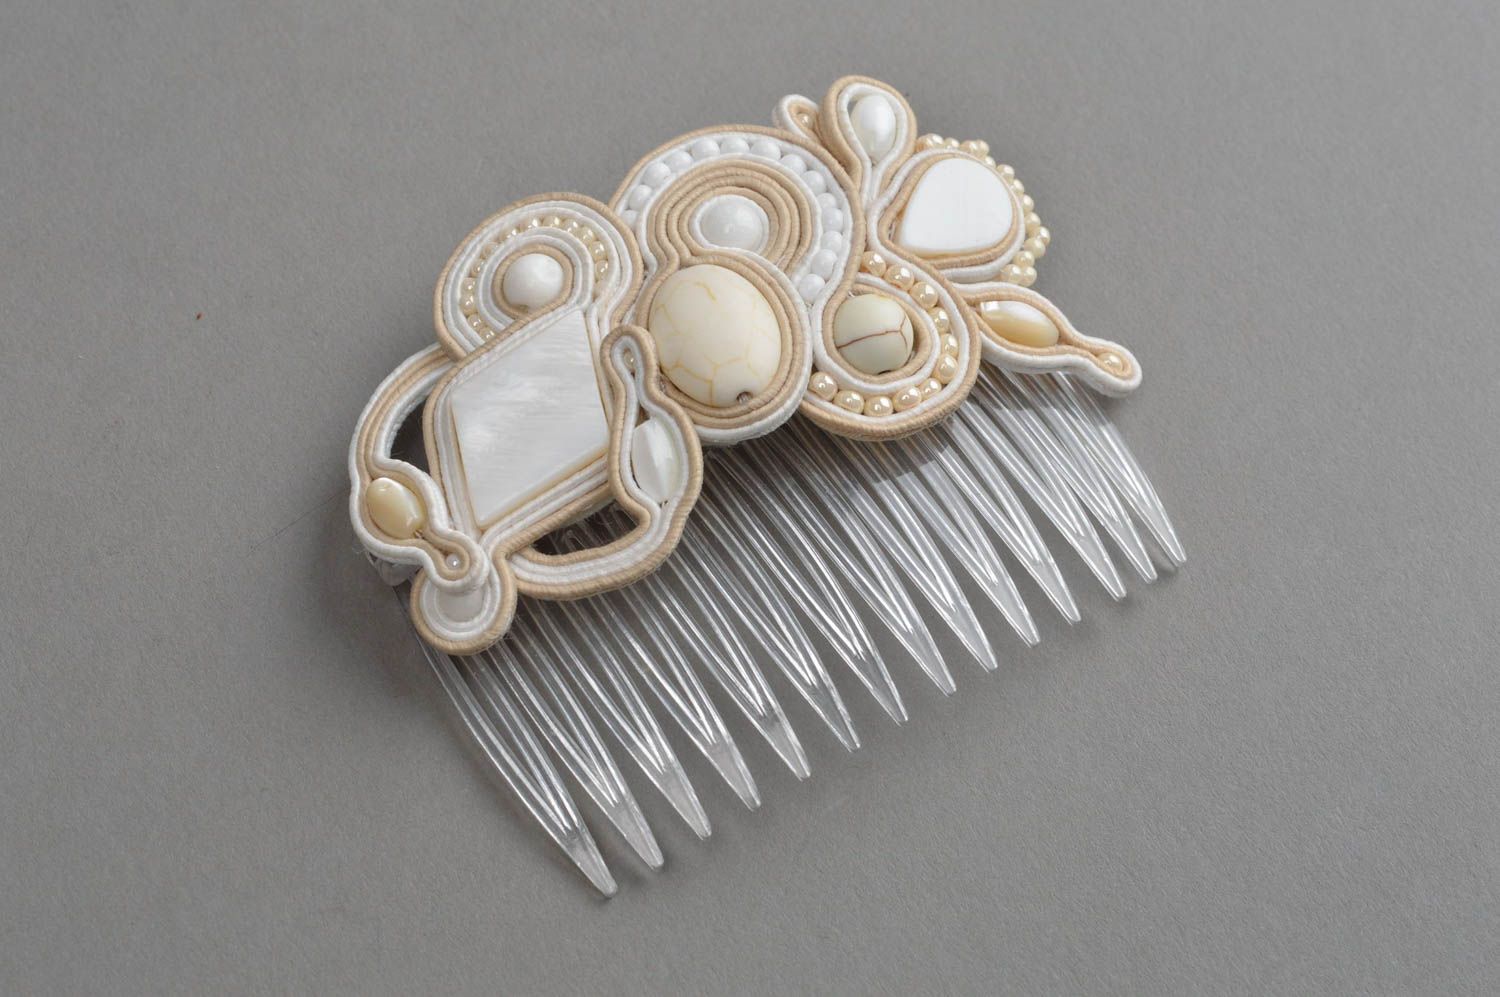 Bridal hair comb handmade hair accessories soutache jewelry gift ideas for her photo 2